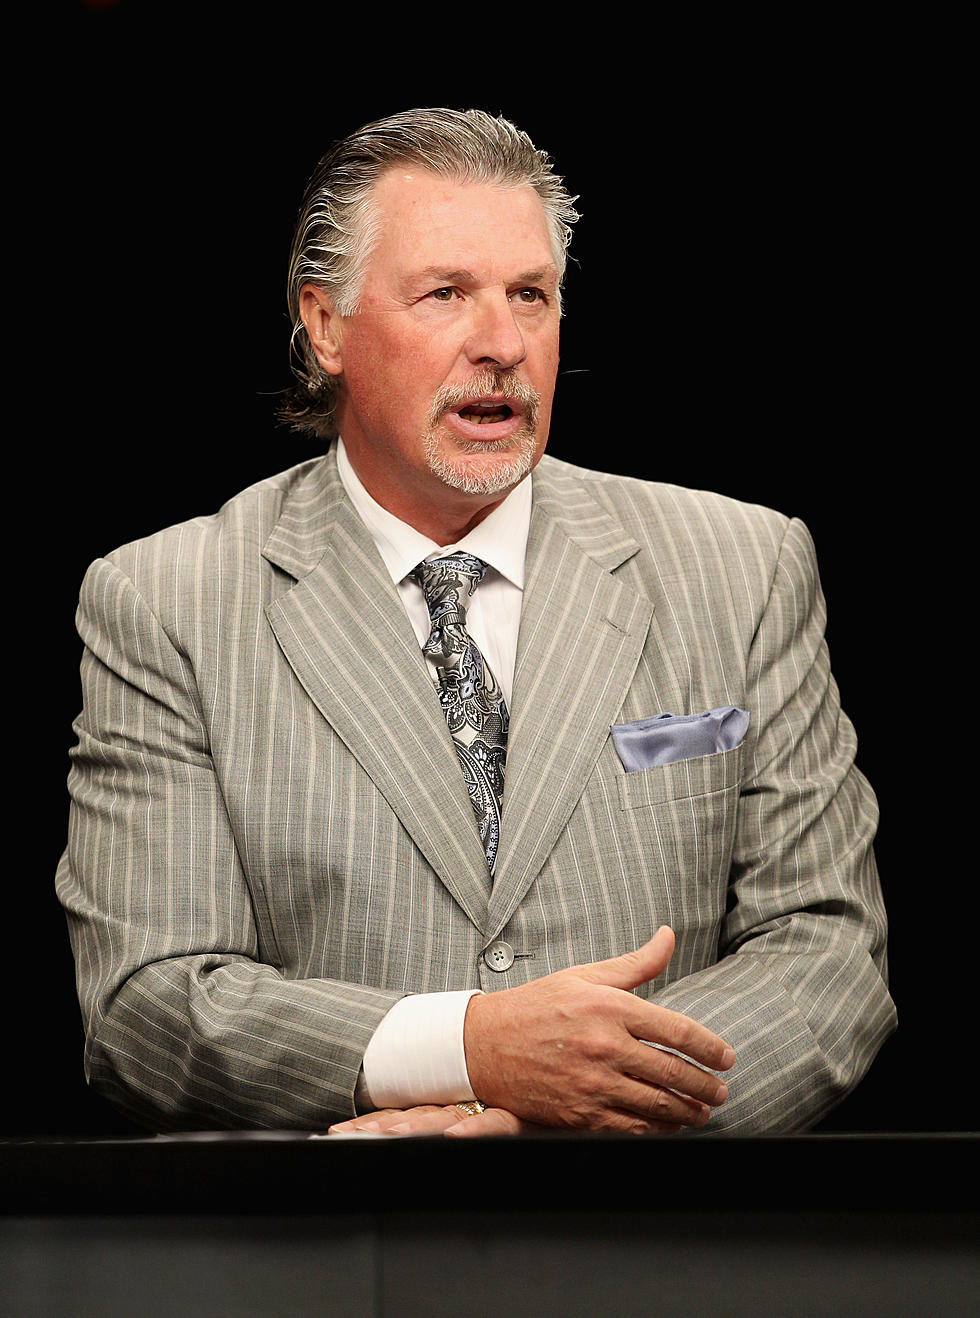 ESPN’s Barry Melrose Shares Epic Story of Working on ESPN Campus [AUDIO]